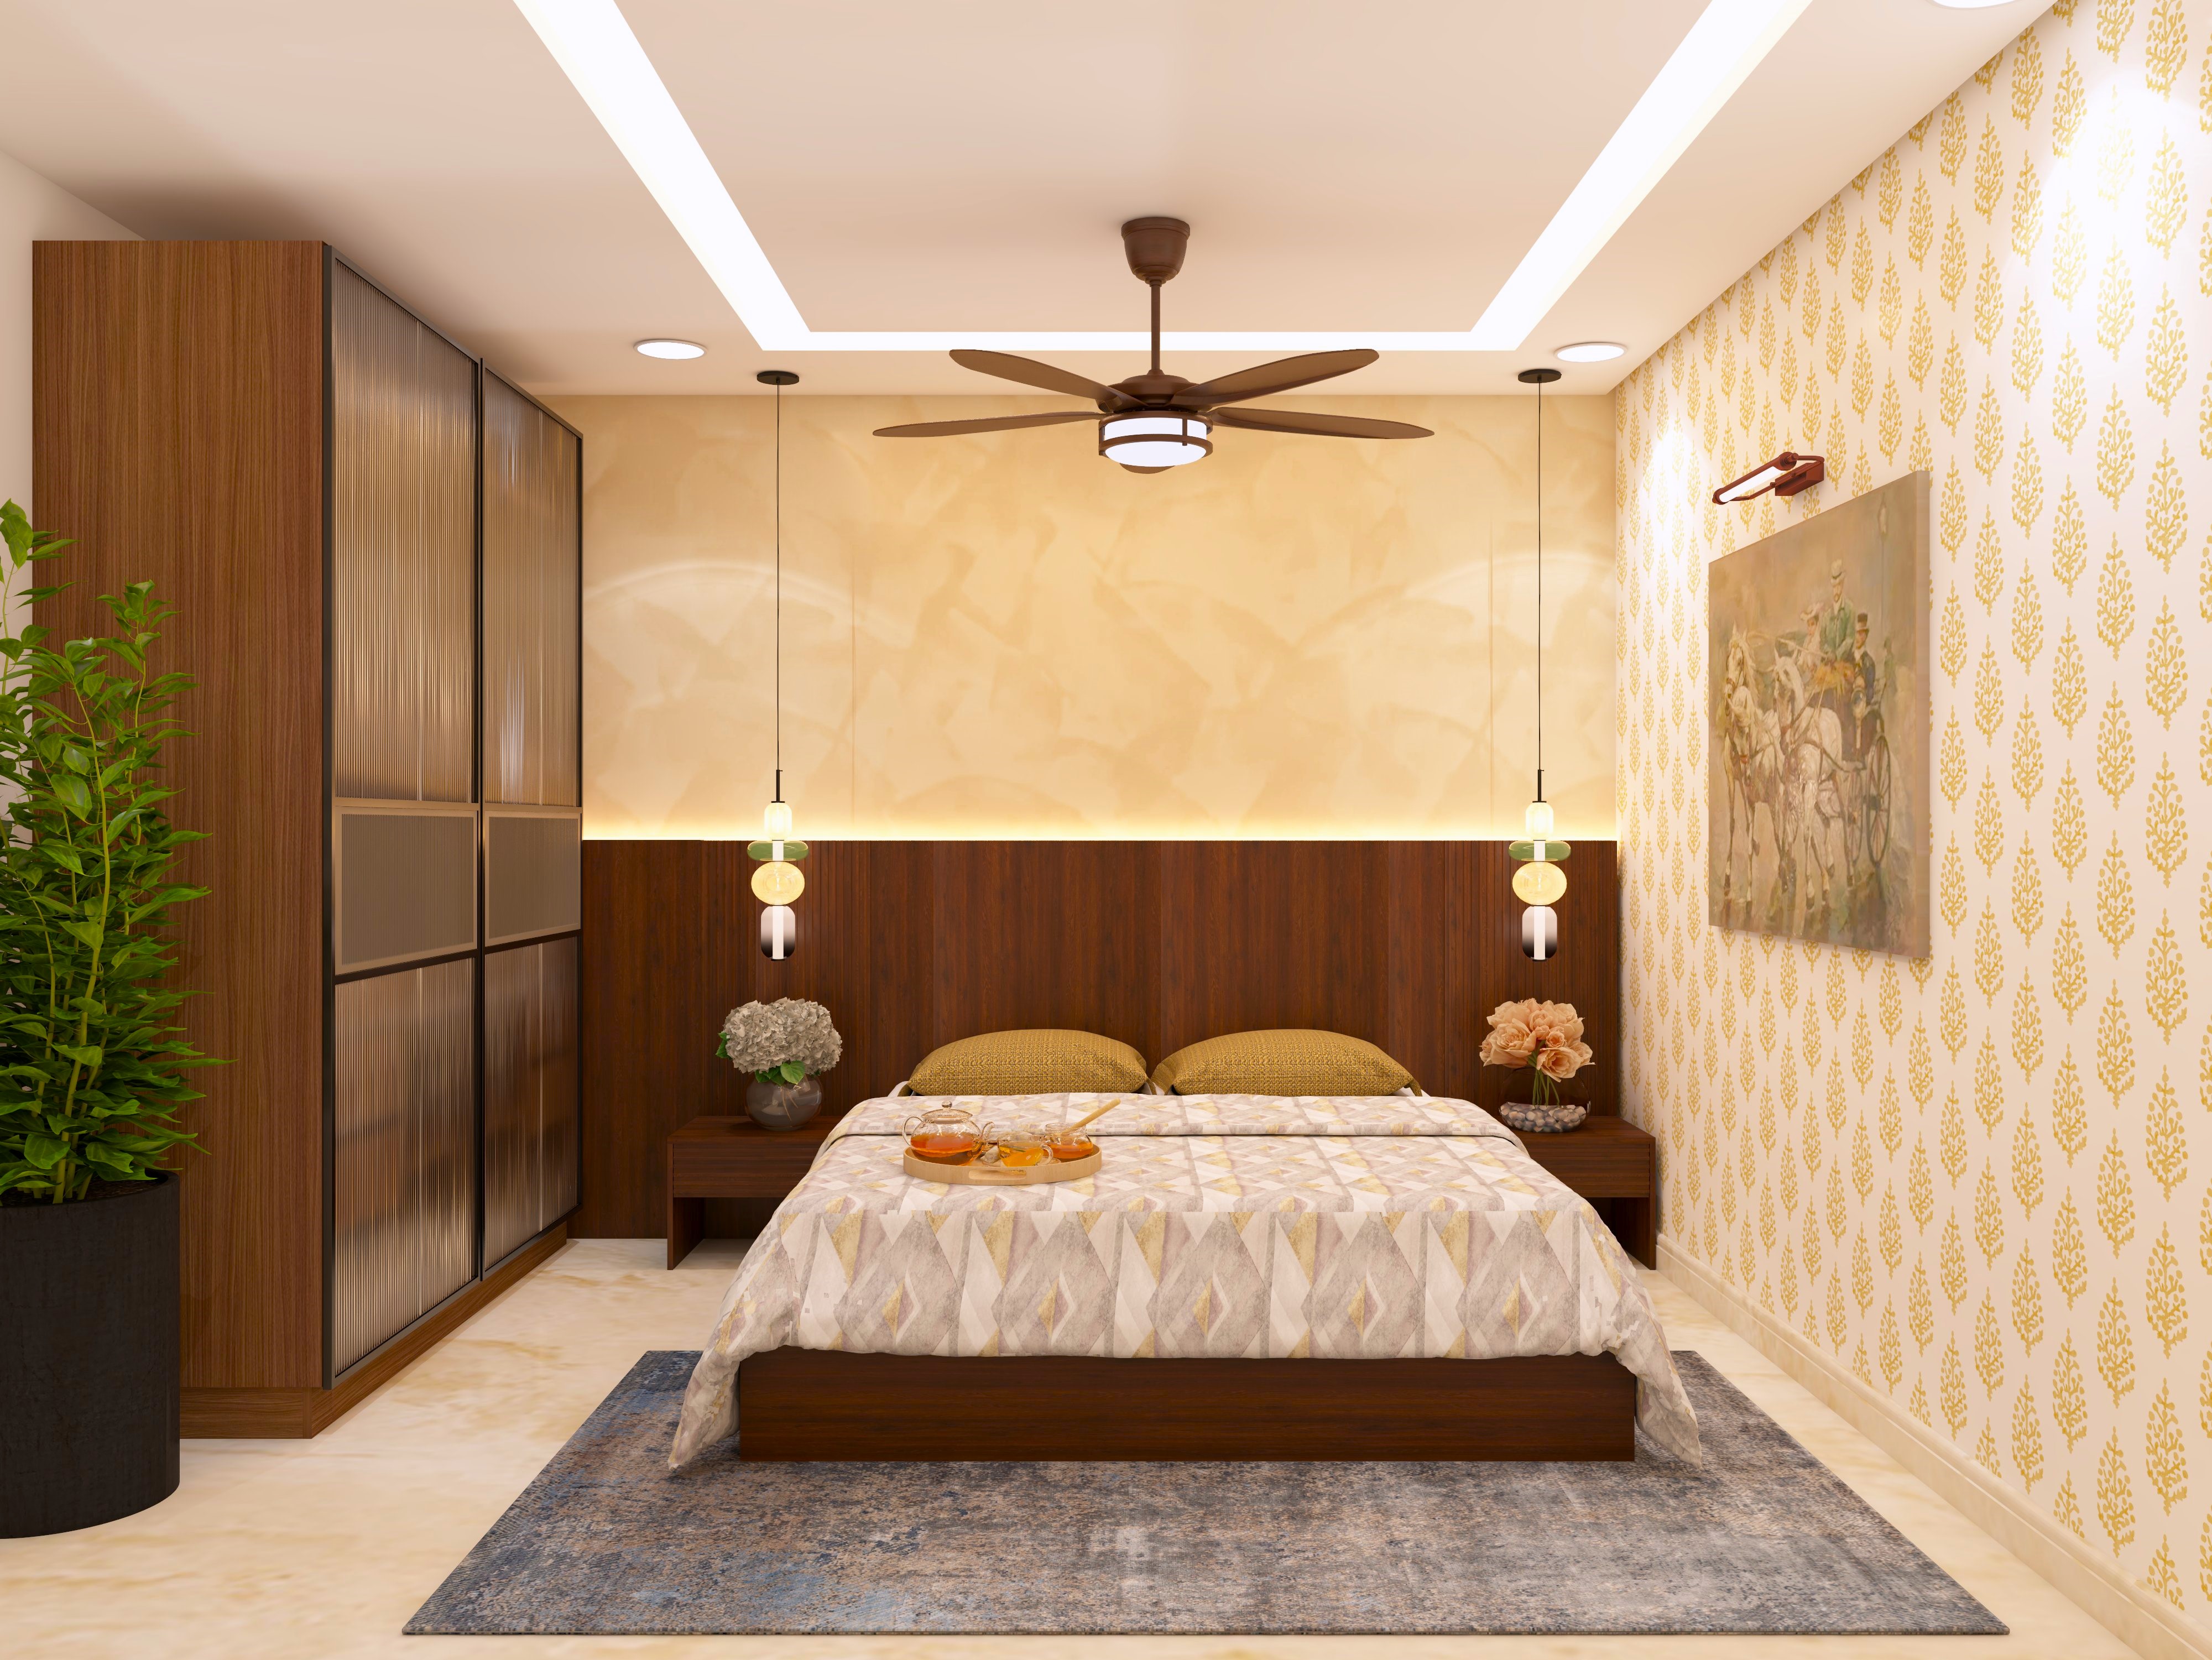 Master bedroom with wooden extended headboard and hanging lights-Beautiful Homes